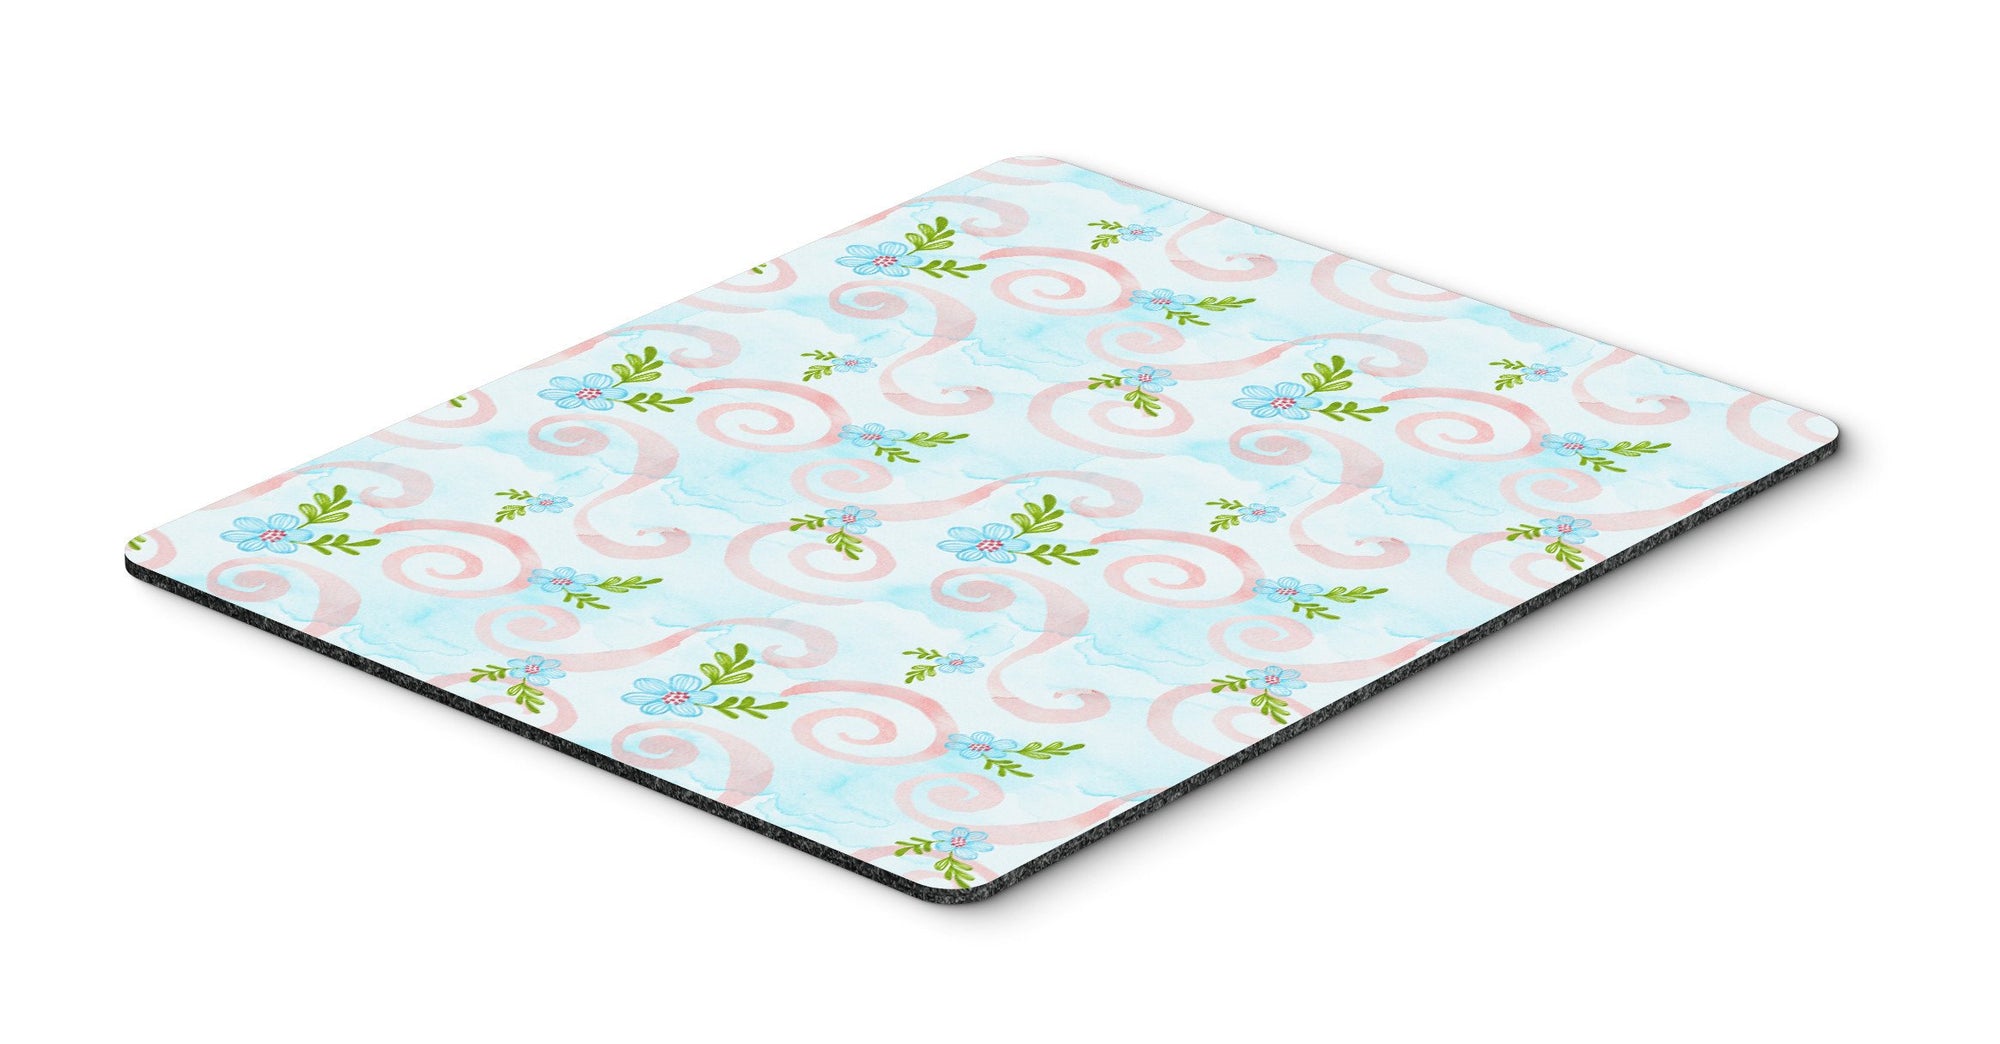 Watercolor Blue Flowers and Swirls Mouse Pad, Hot Pad or Trivet BB7482MP by Caroline's Treasures